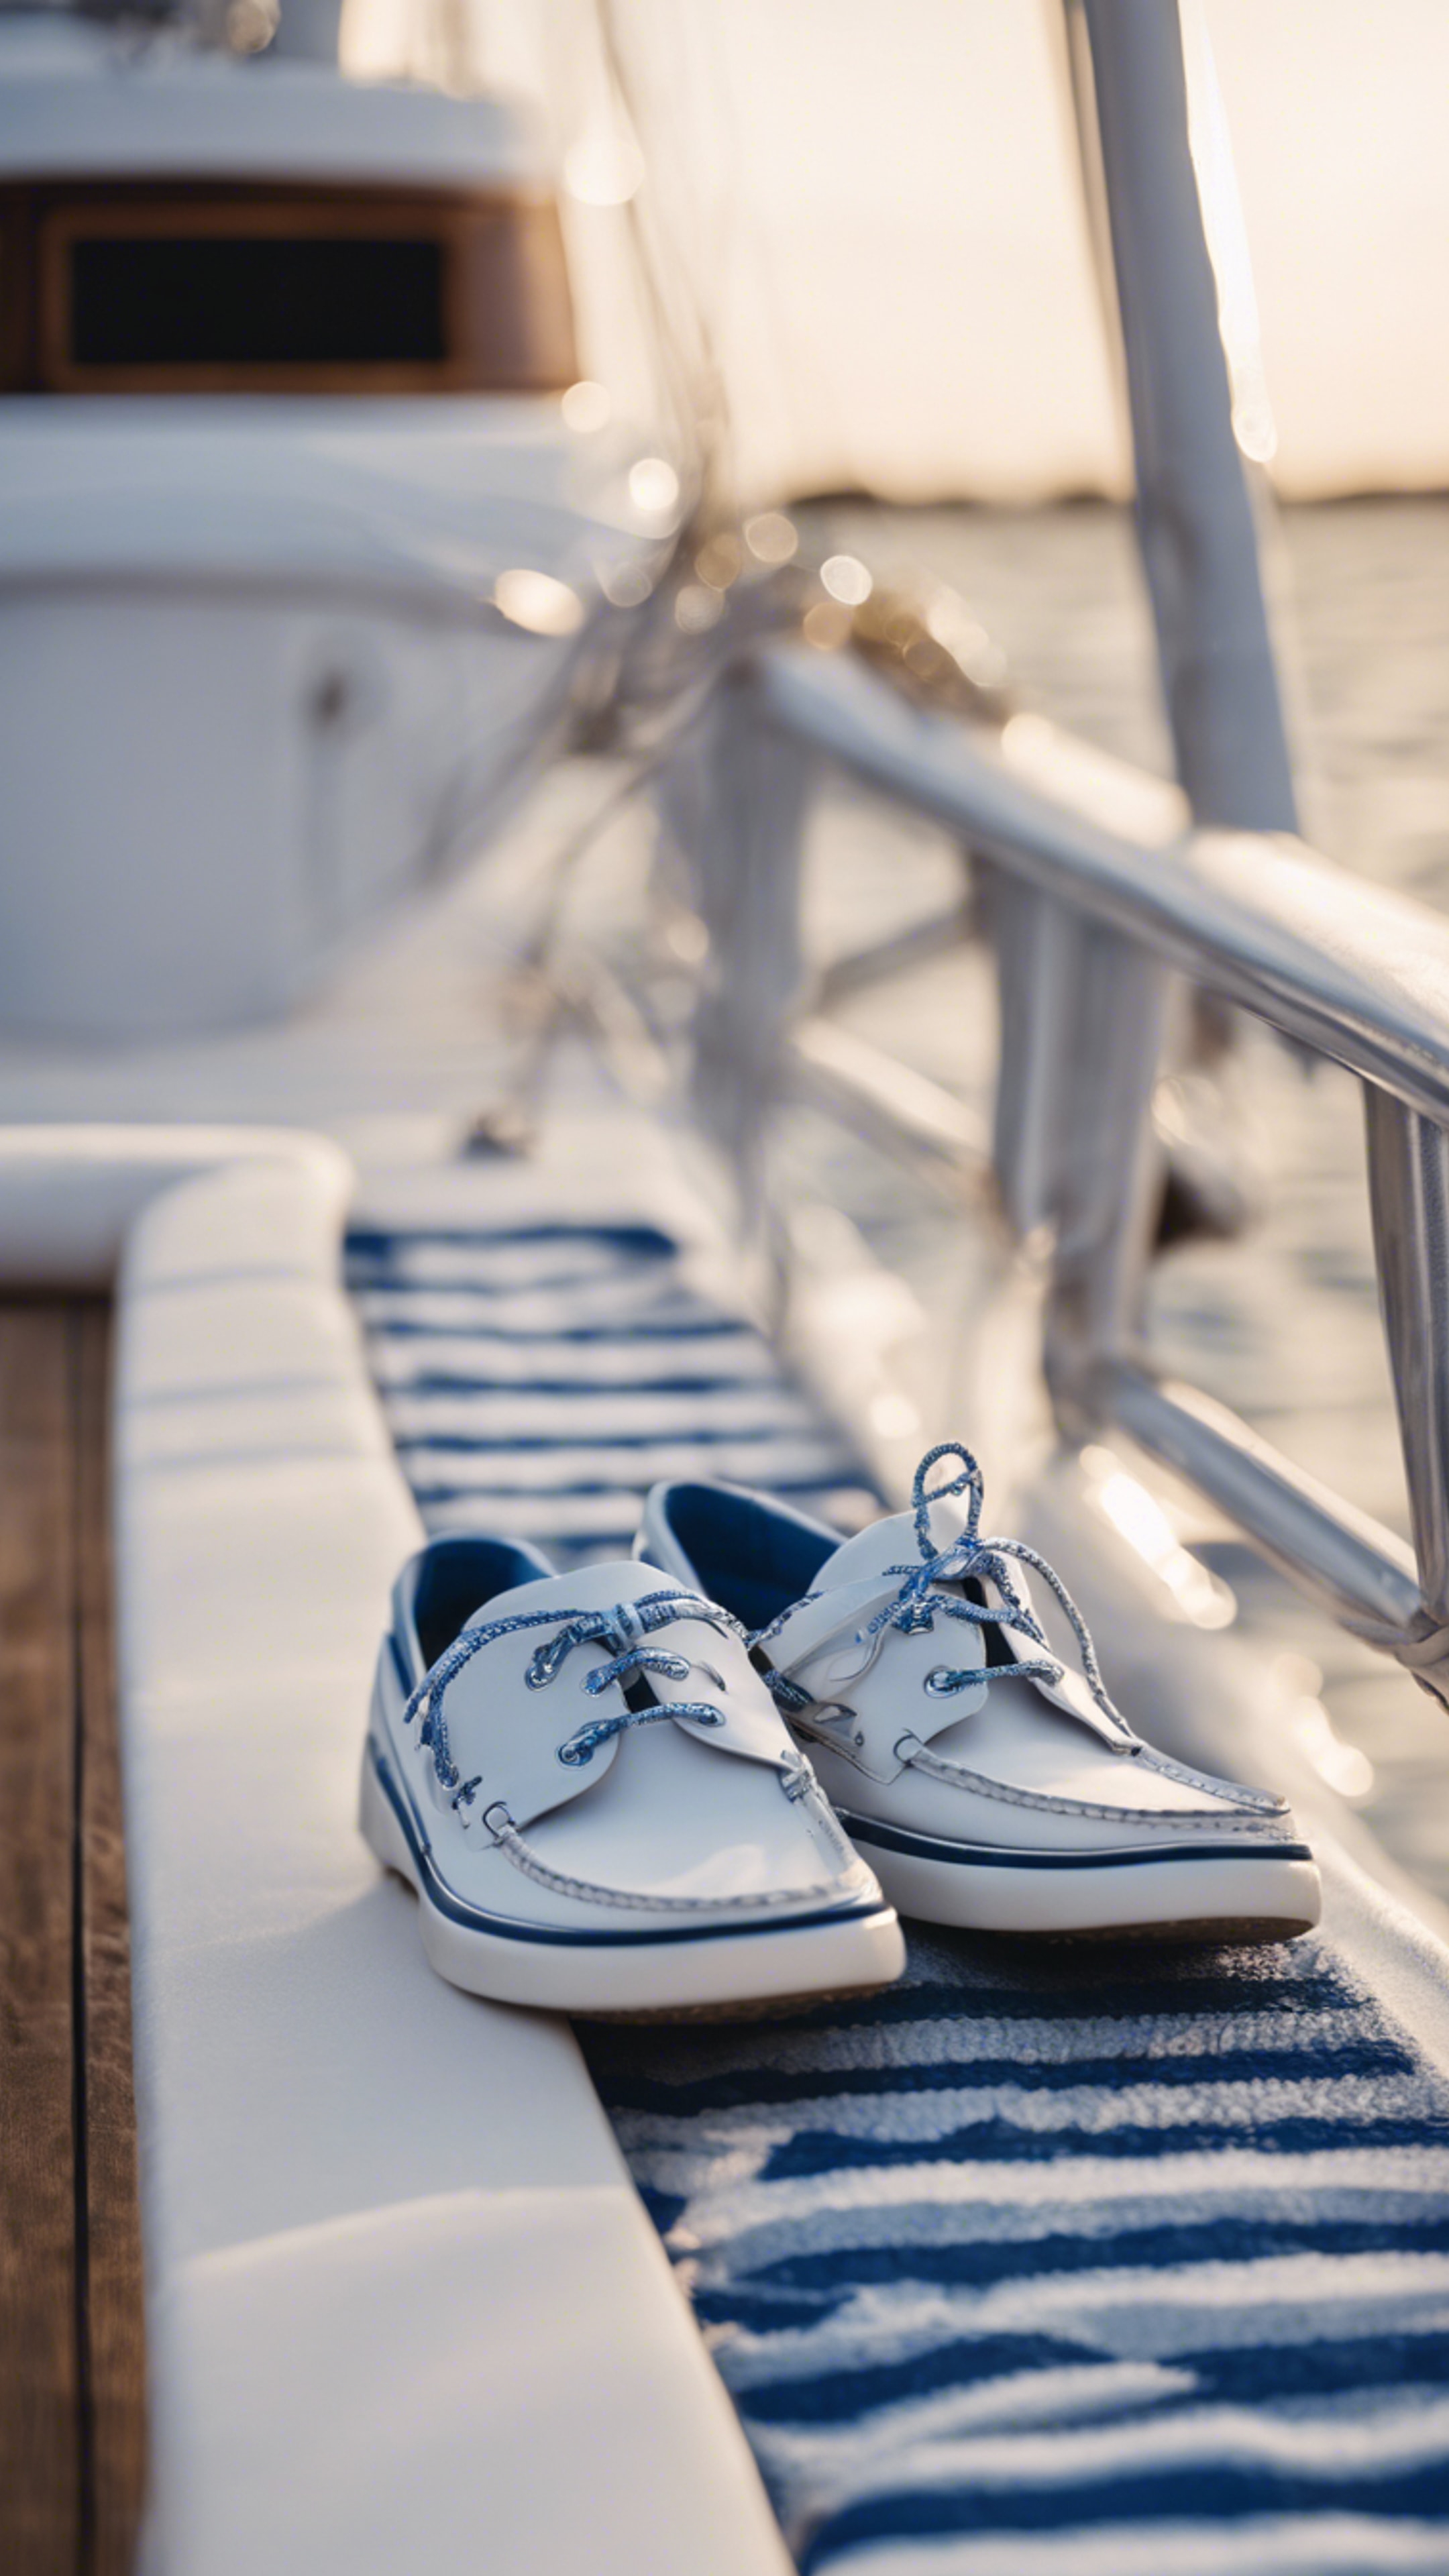 A pair of blue and white boat shoes resting on a yacht deck, reflecting preppy fashion. Behang[e5e4a620cbd541dd8bee]